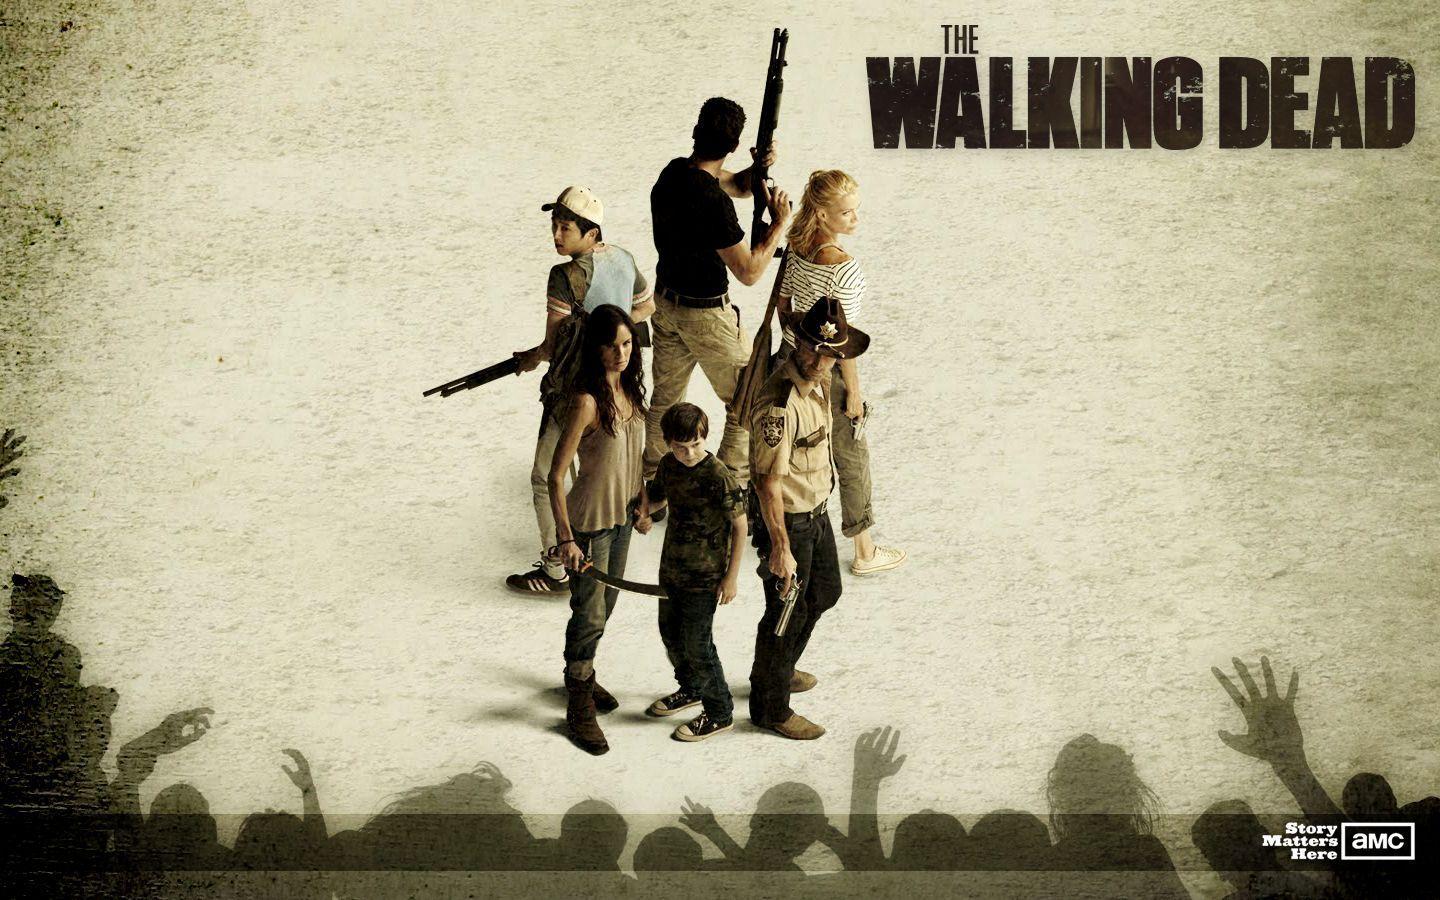 The Walking Dead Wallpaper HD 24. Mzsunflower&;s Say What?